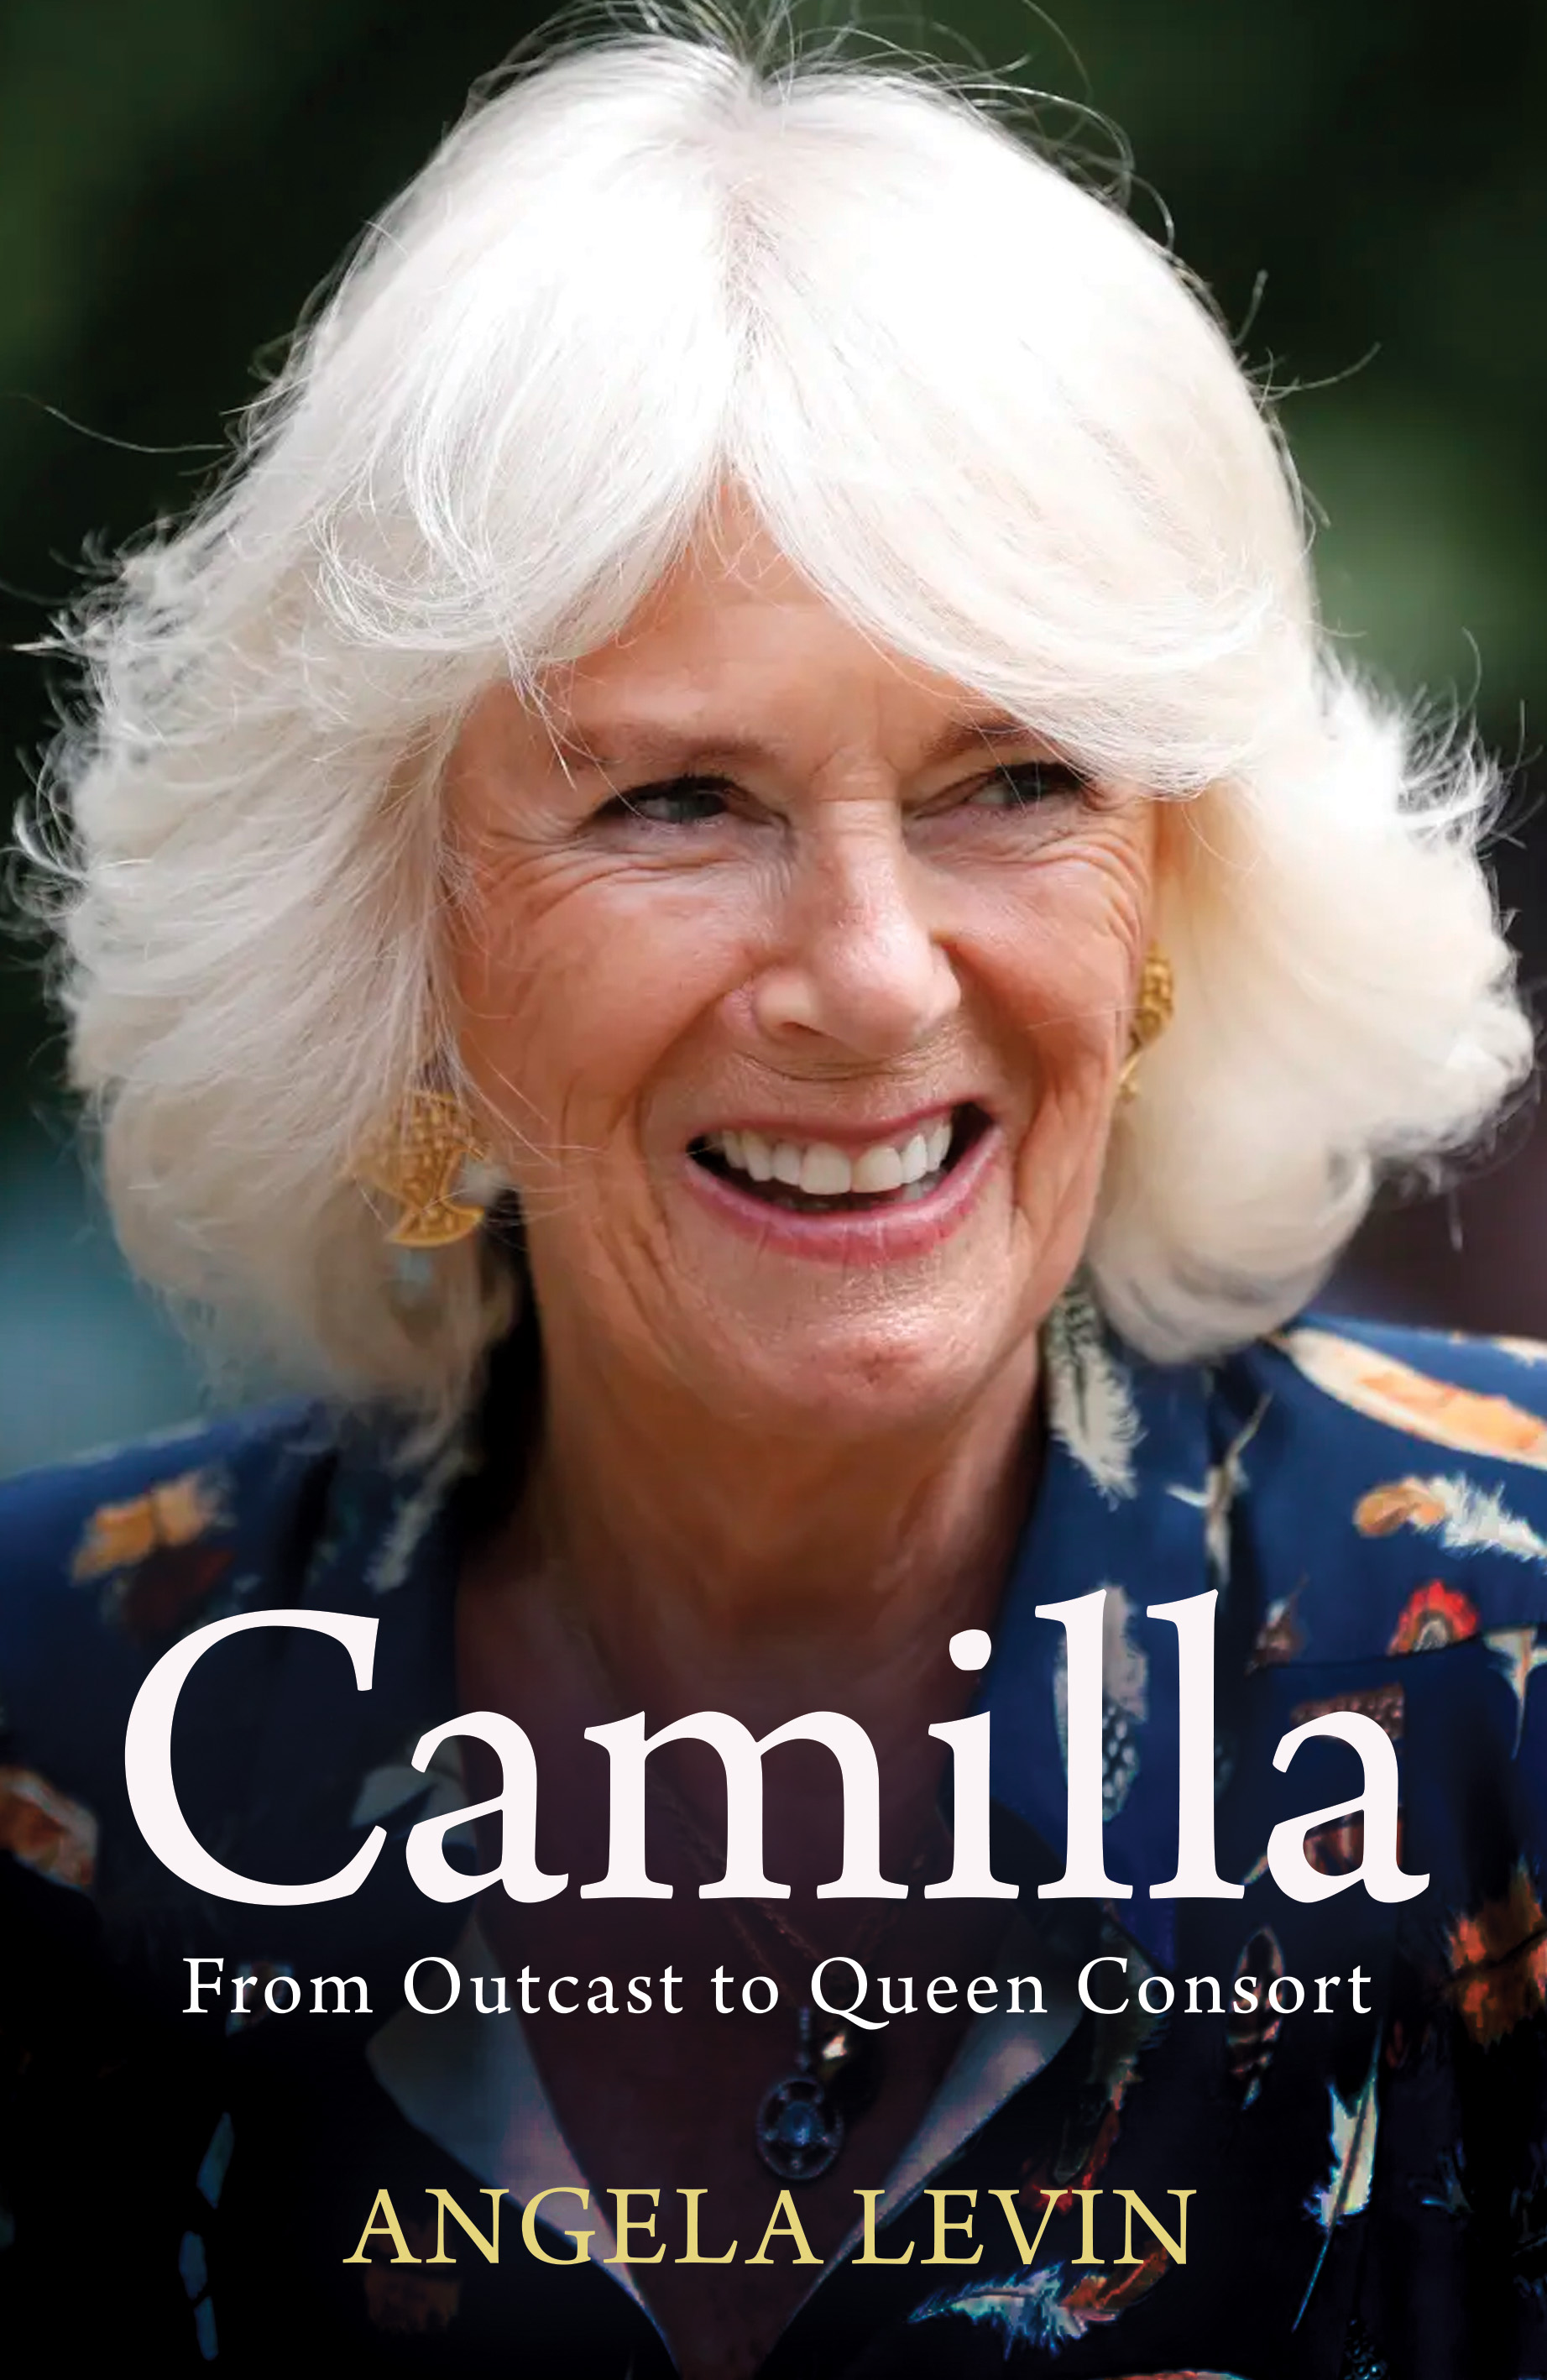 New book on Queen Consort Camilla will be out on September 29th